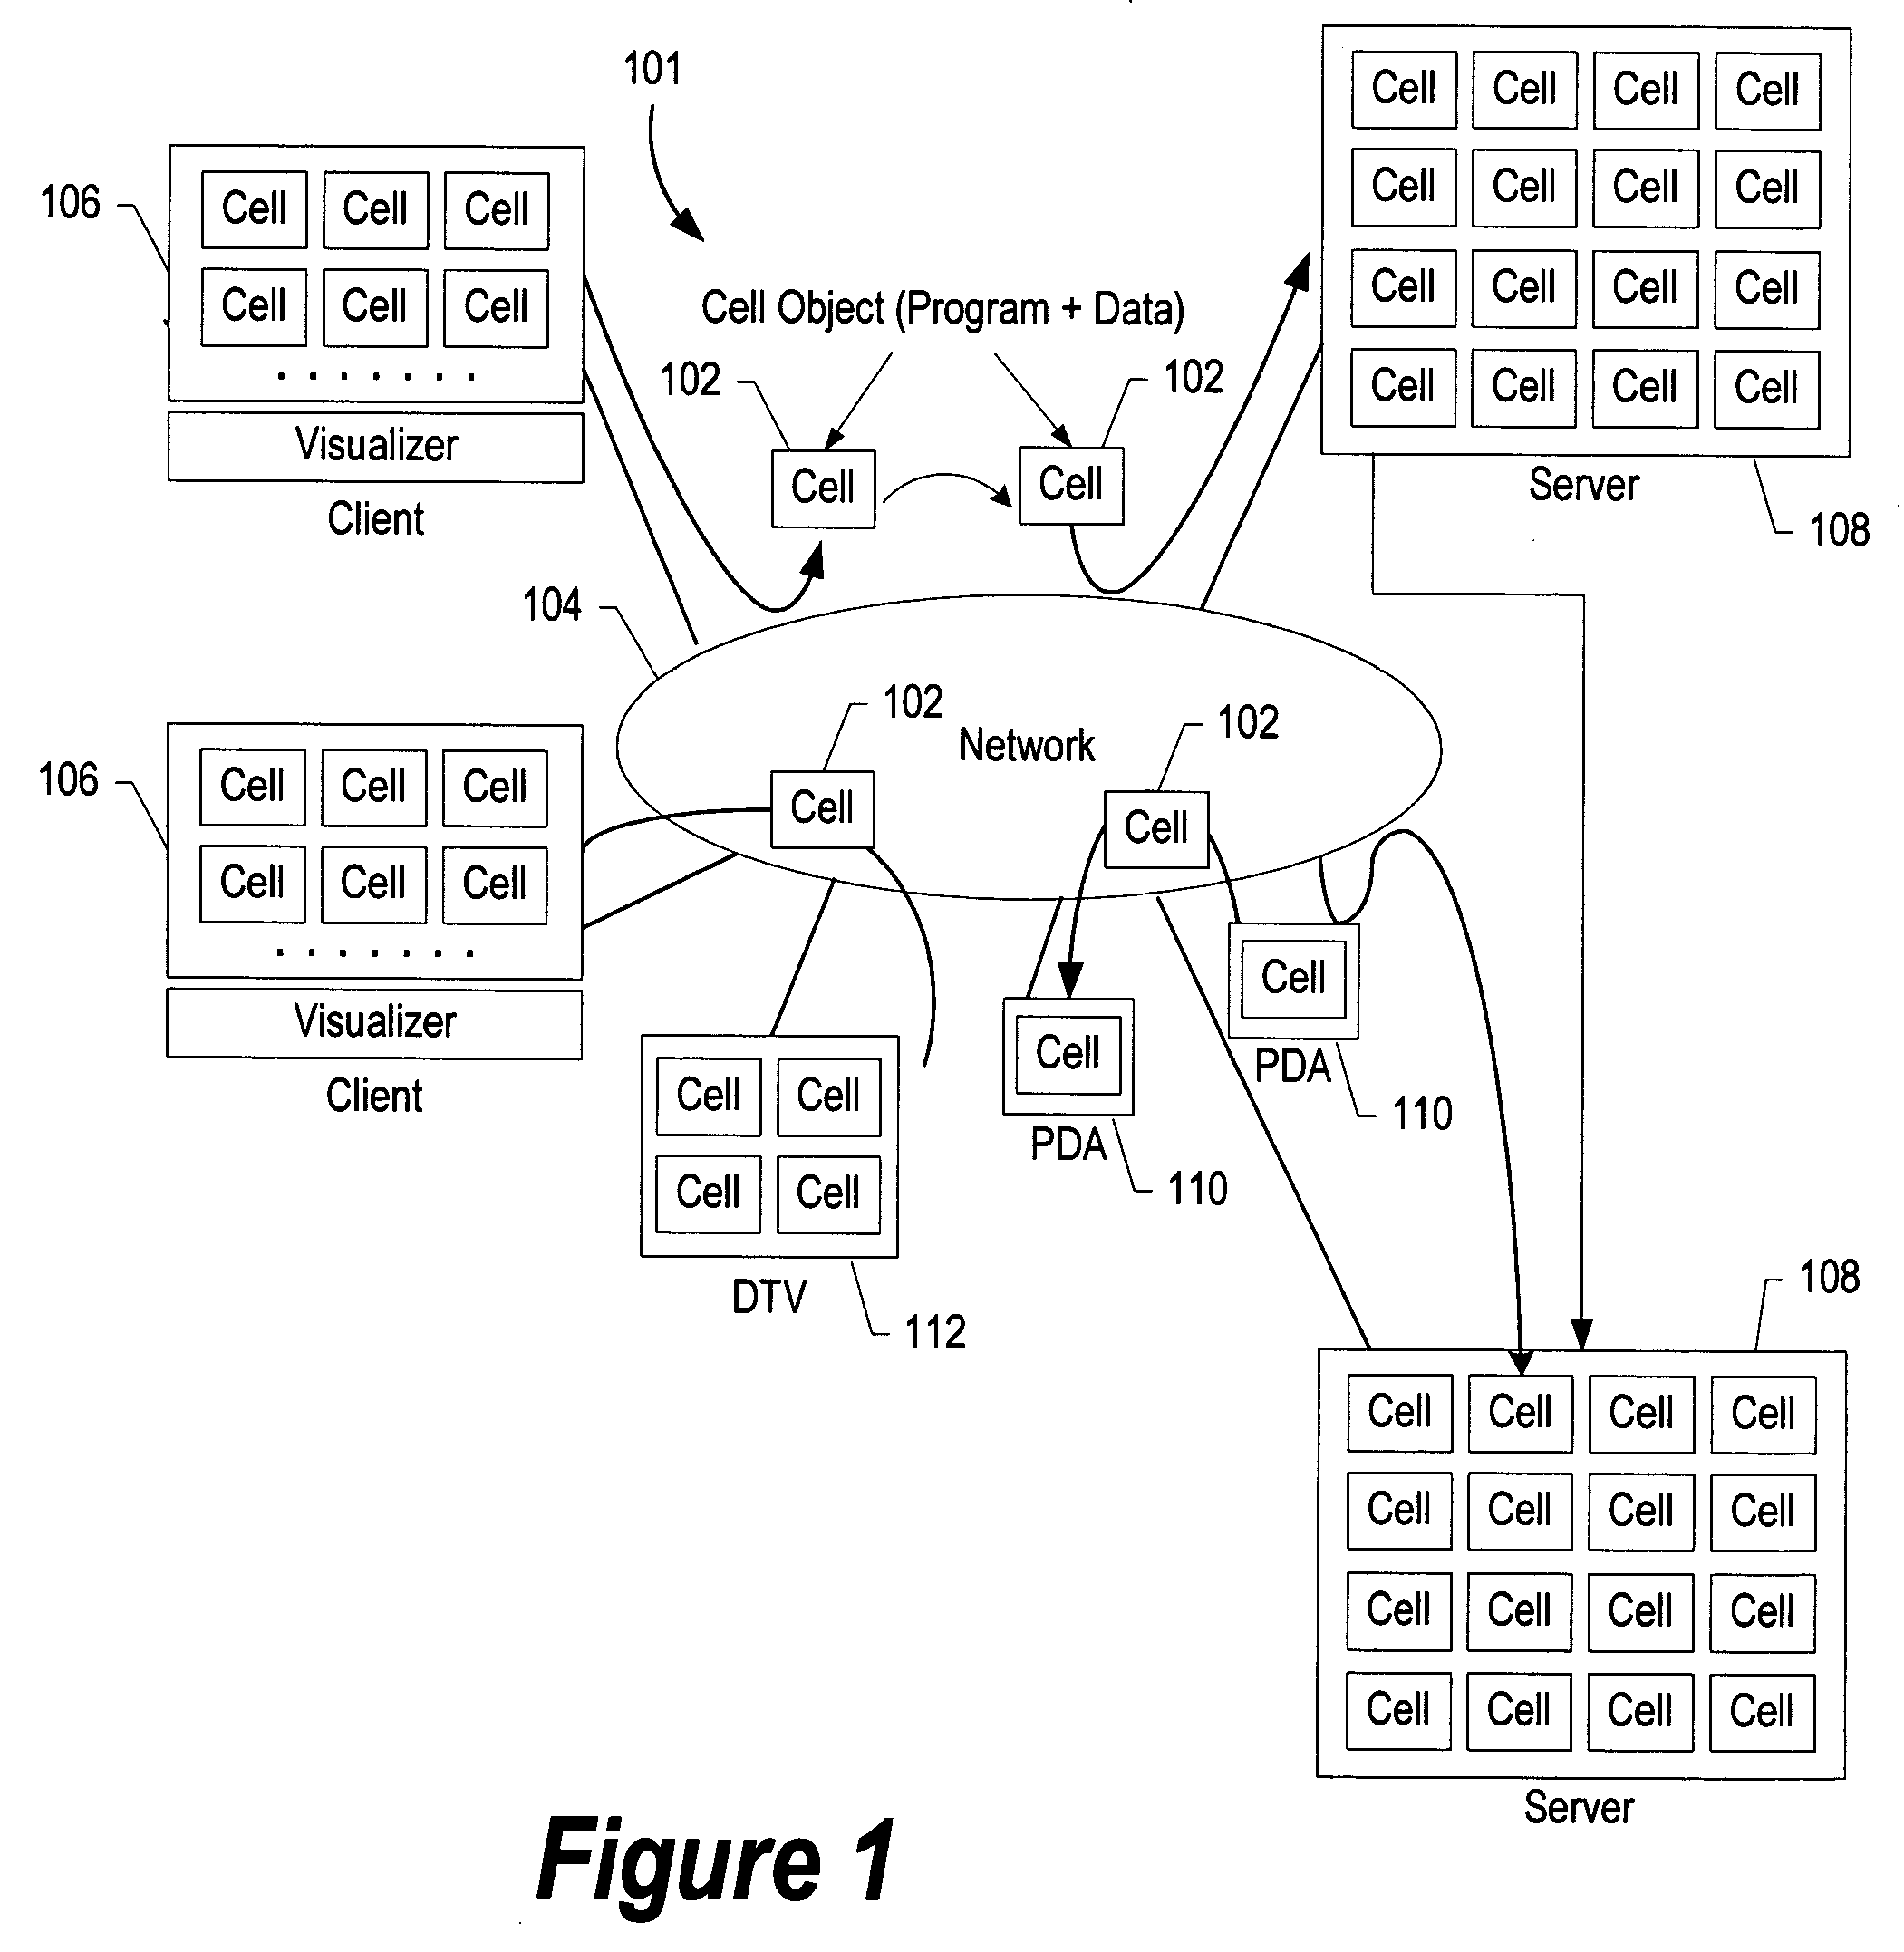 System and method for balancing computational load across a plurality of processors